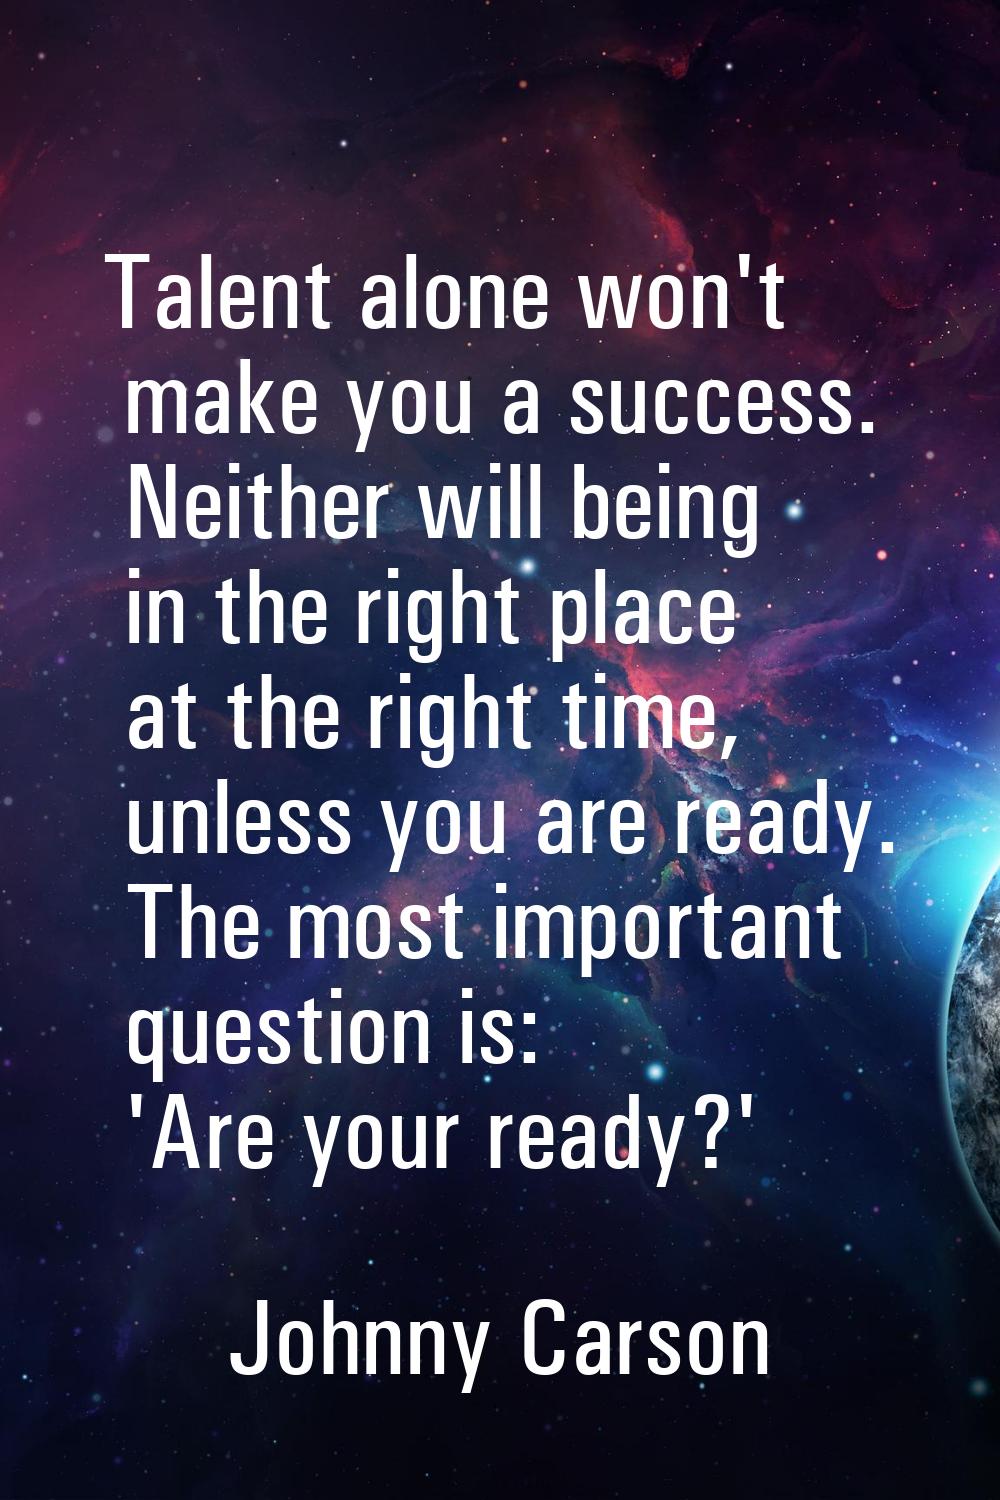 Talent alone won't make you a success. Neither will being in the right place at the right time, unl